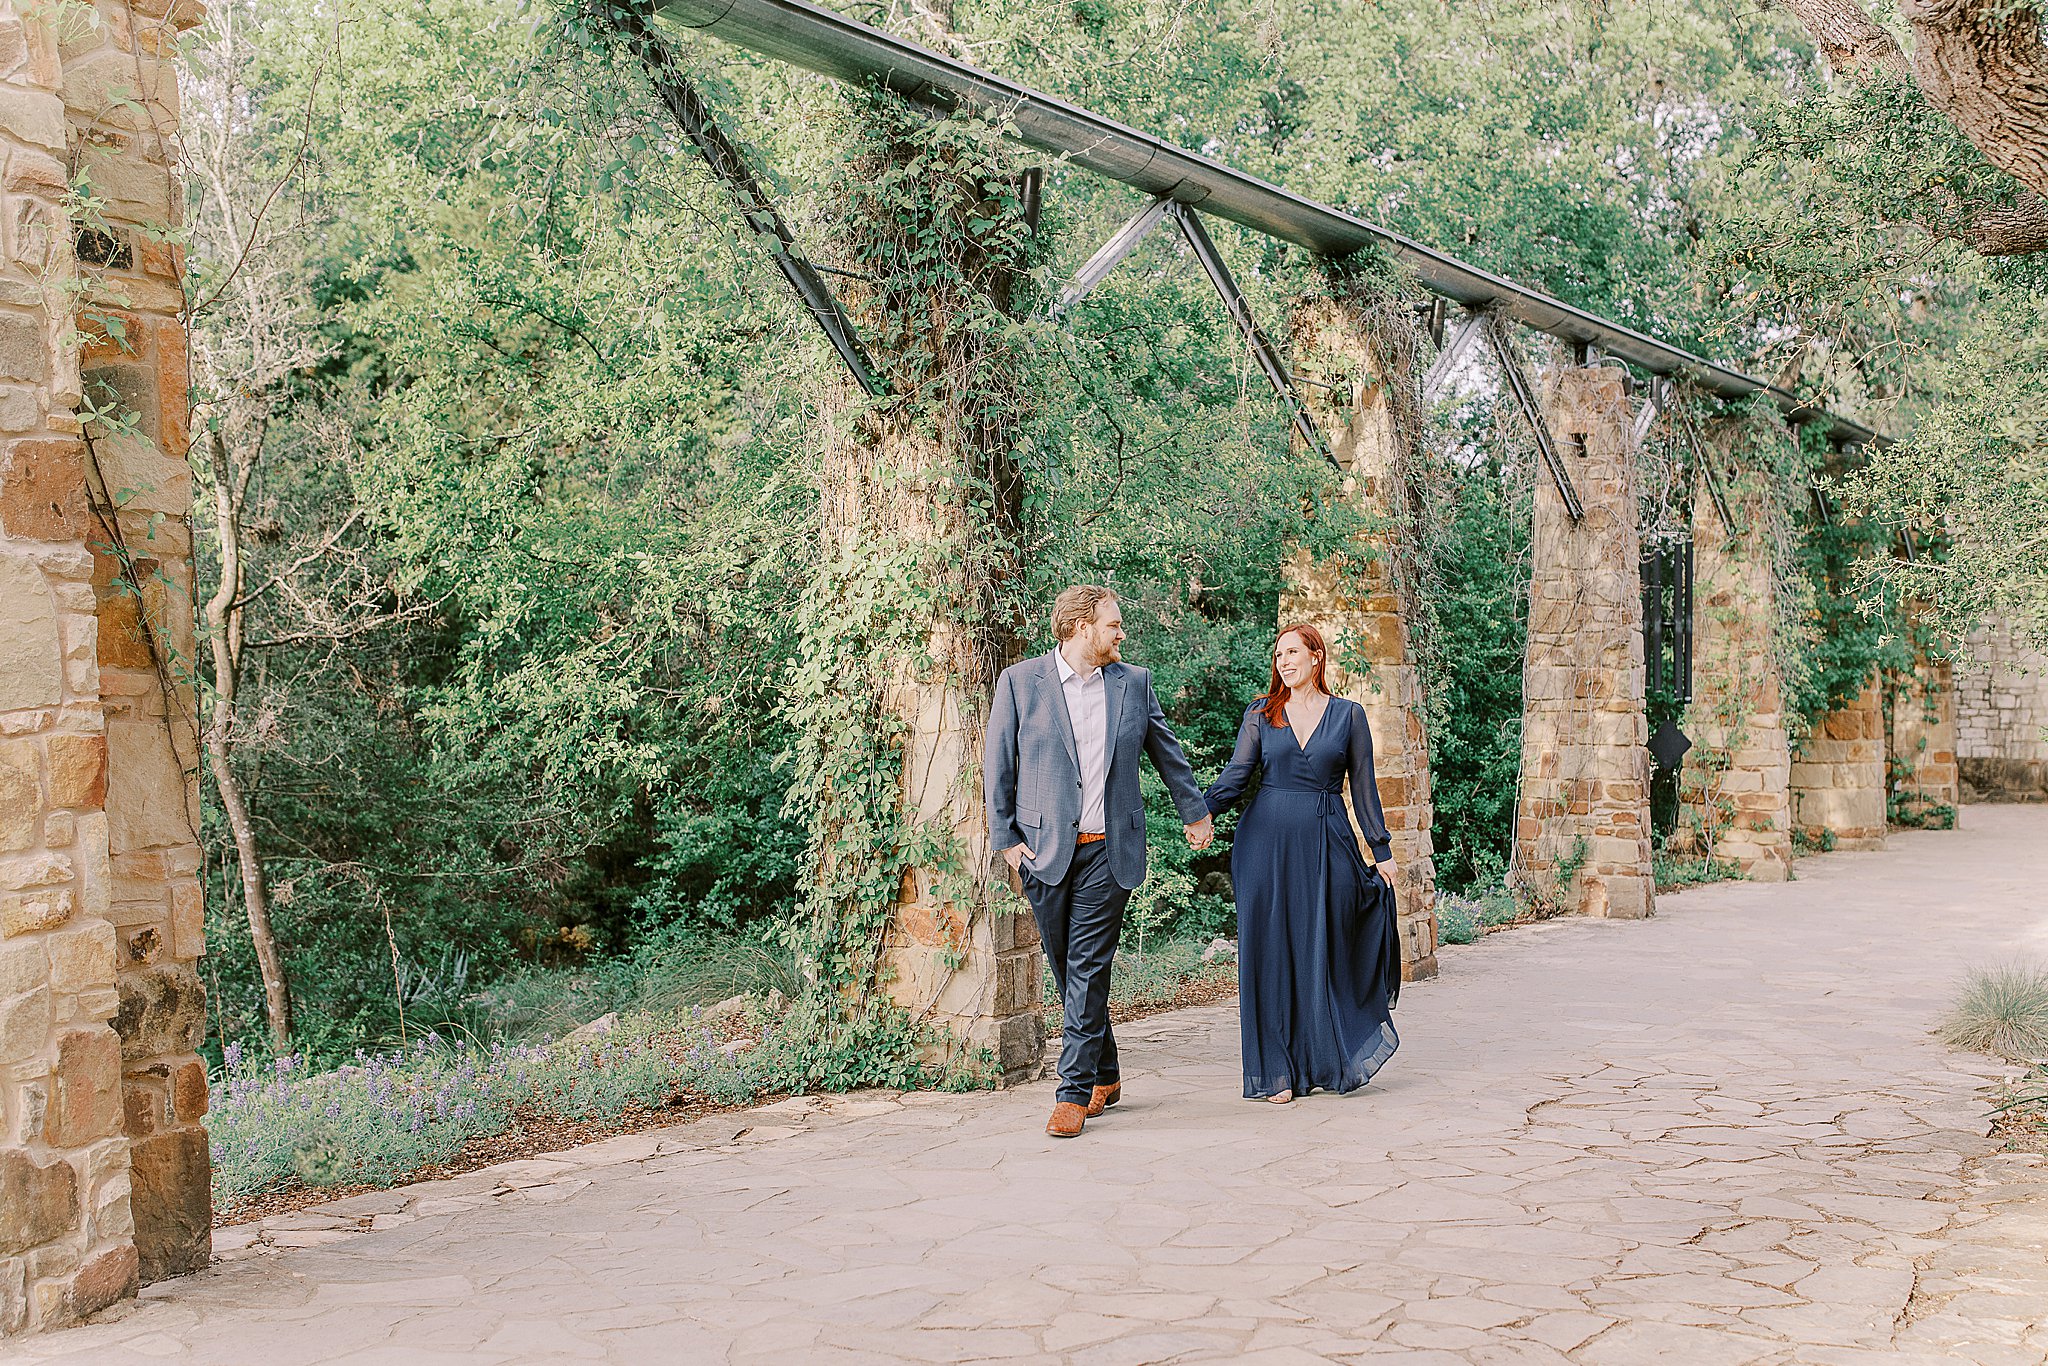 Navy Dress and Grey Suit at Engagement Session at Ladybird Johnson, Walking Couple Photos